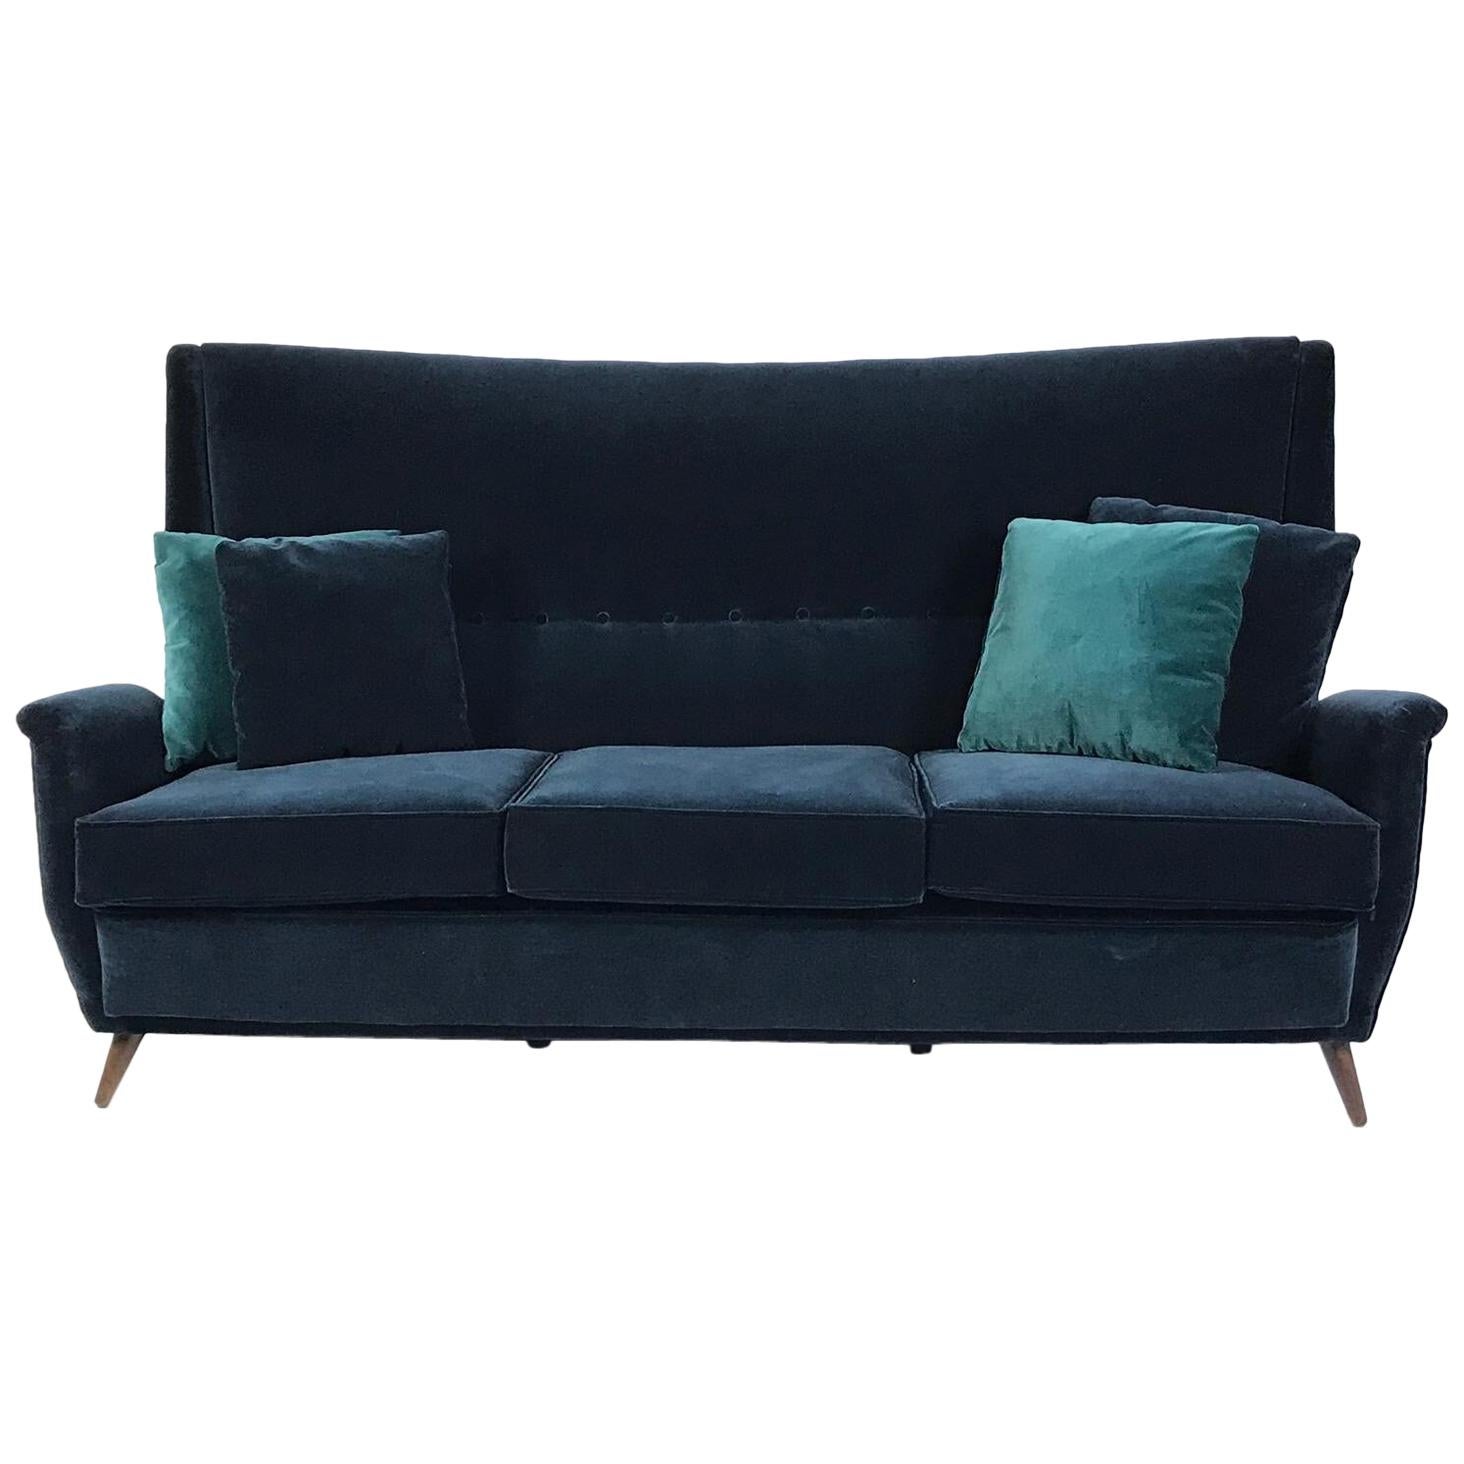 Gio Ponti 3-Seat Wingback Sofa Newly Upholstered in Blue Velvet